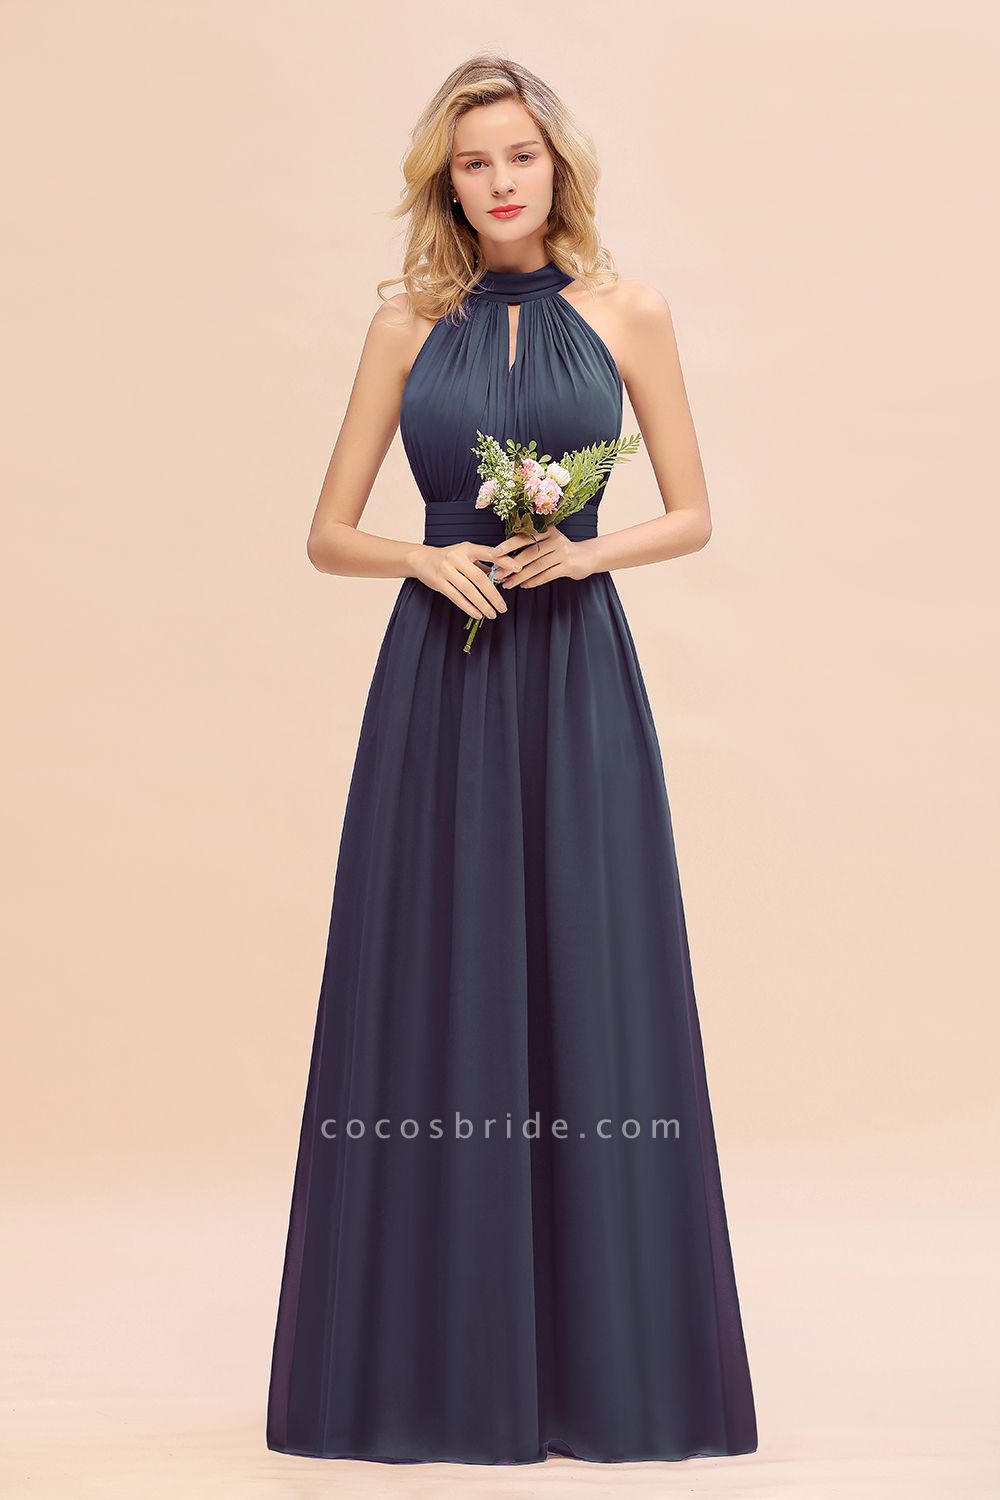 BM0758 Glamorous High-Neck Halter Bridesmaid Affordable Dresses with Ruffle